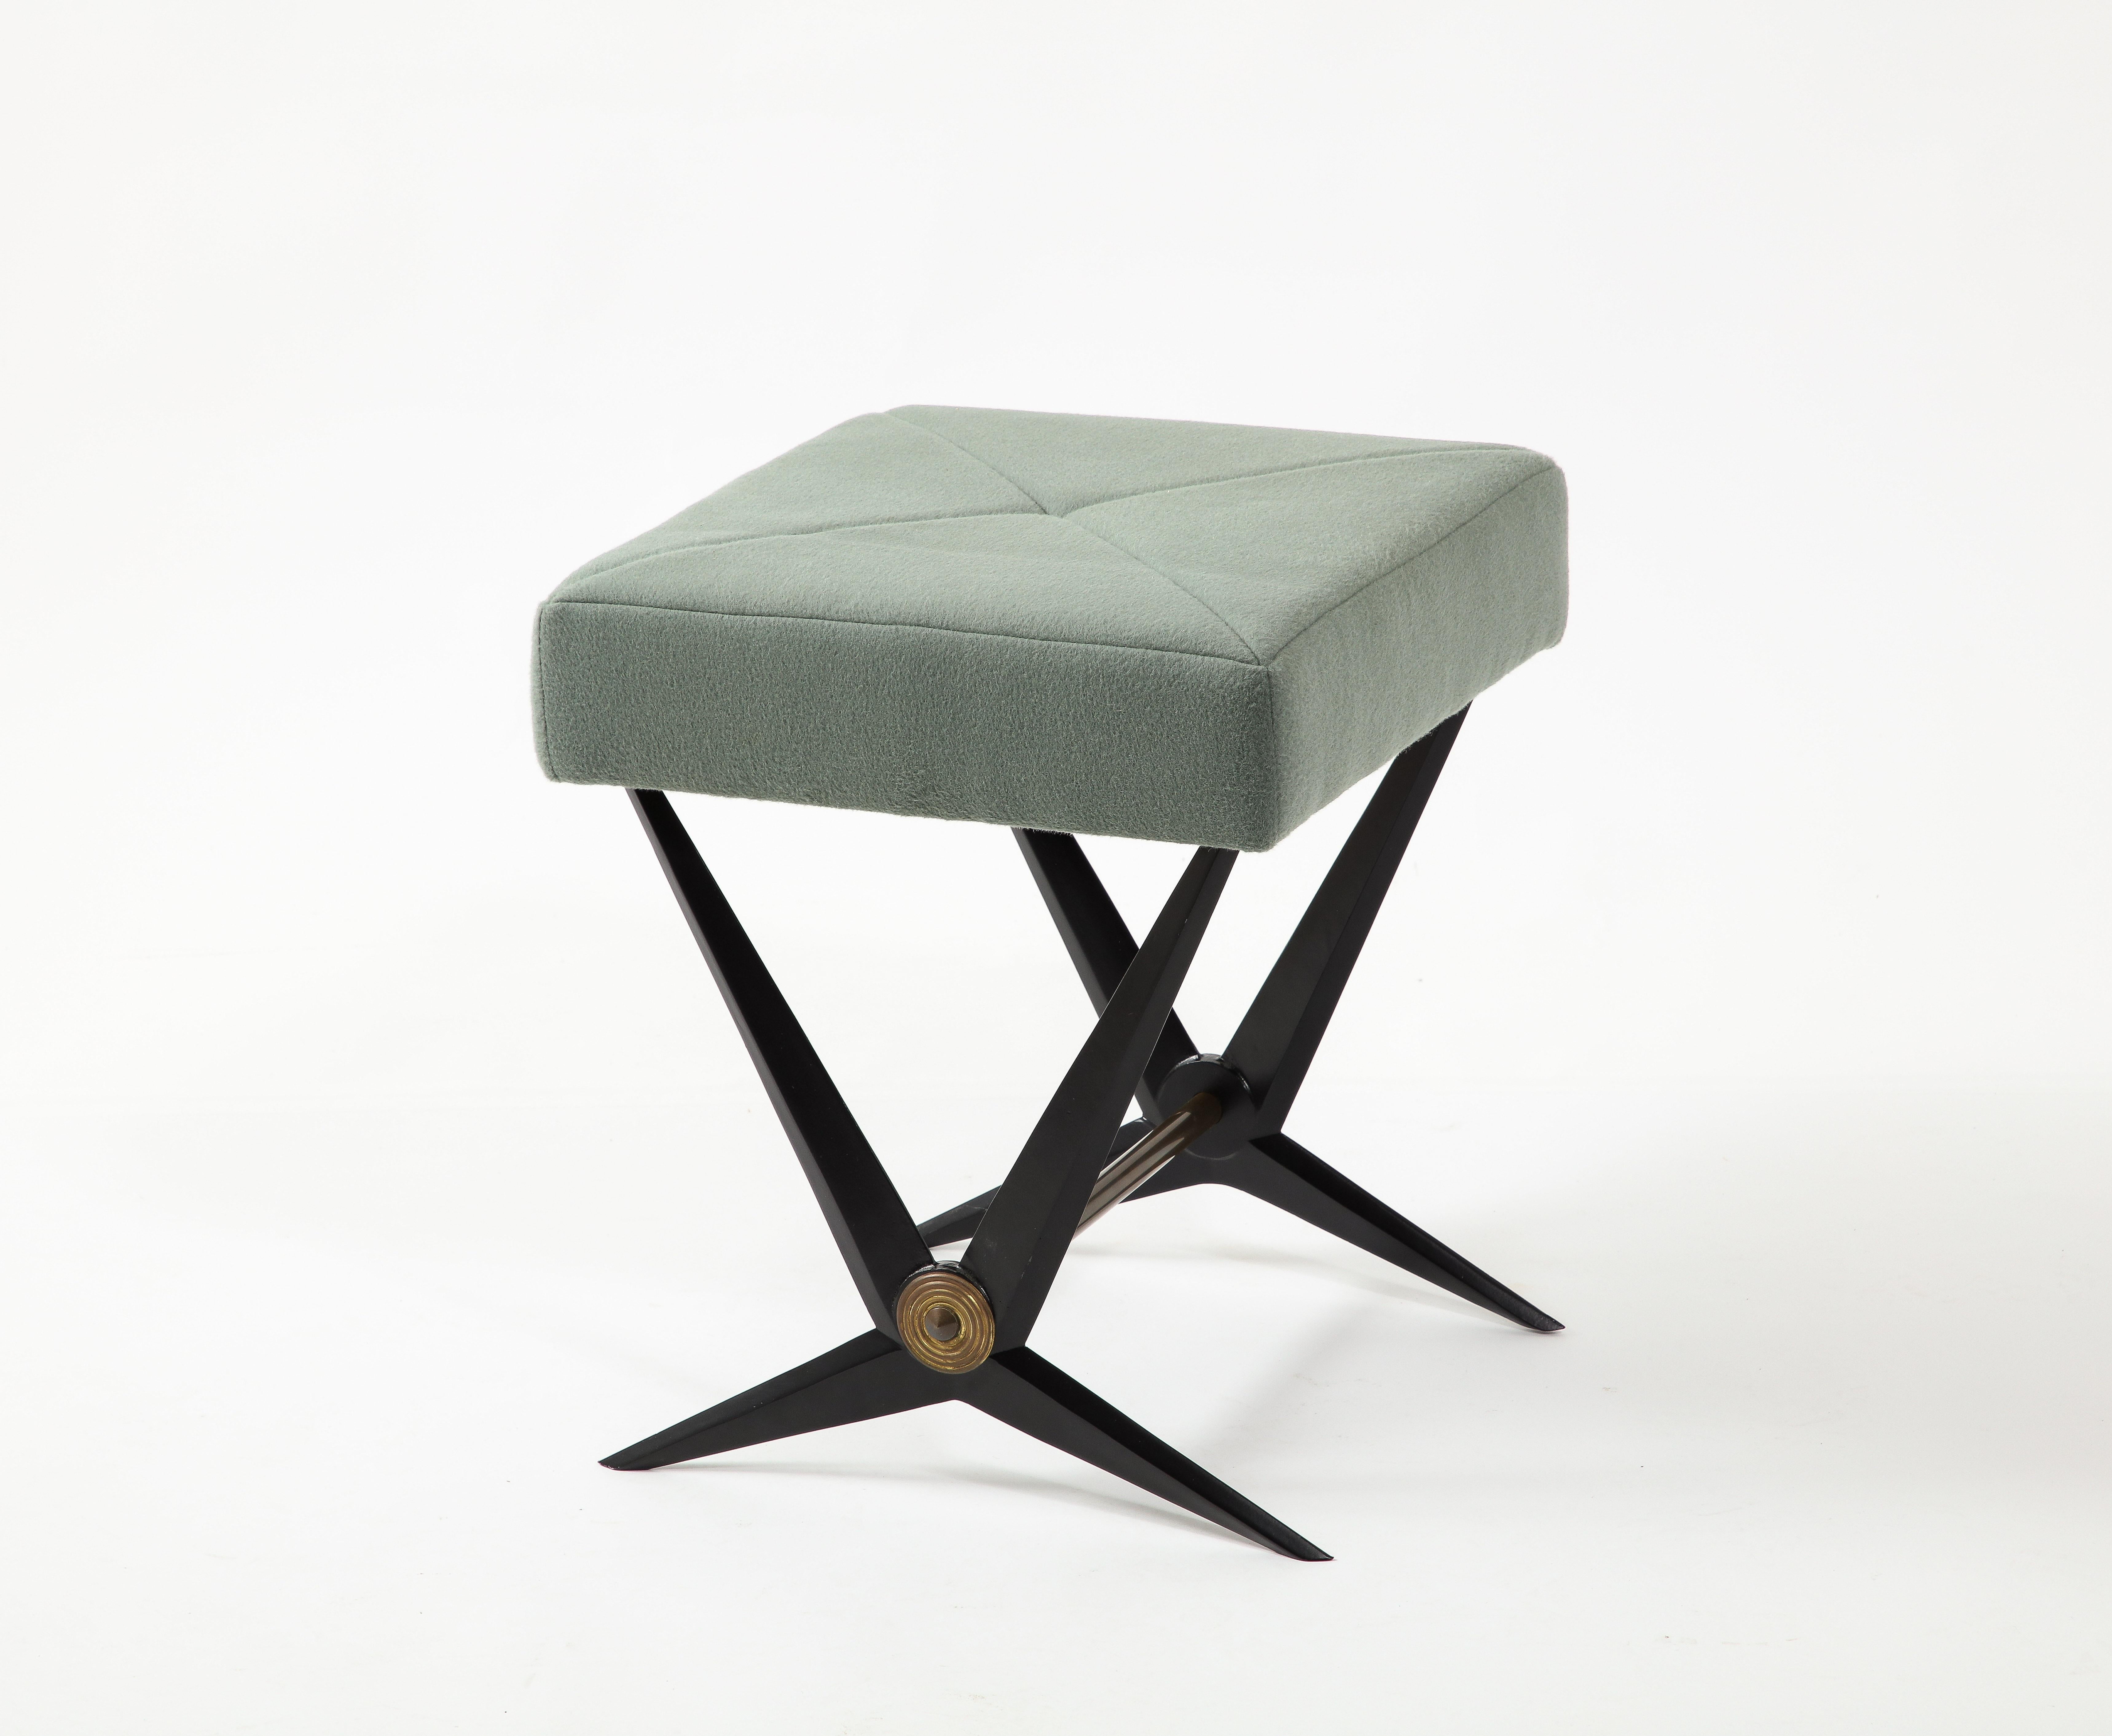 Enameled cast Aluminum and Brass stools with teal wool upholstery.
